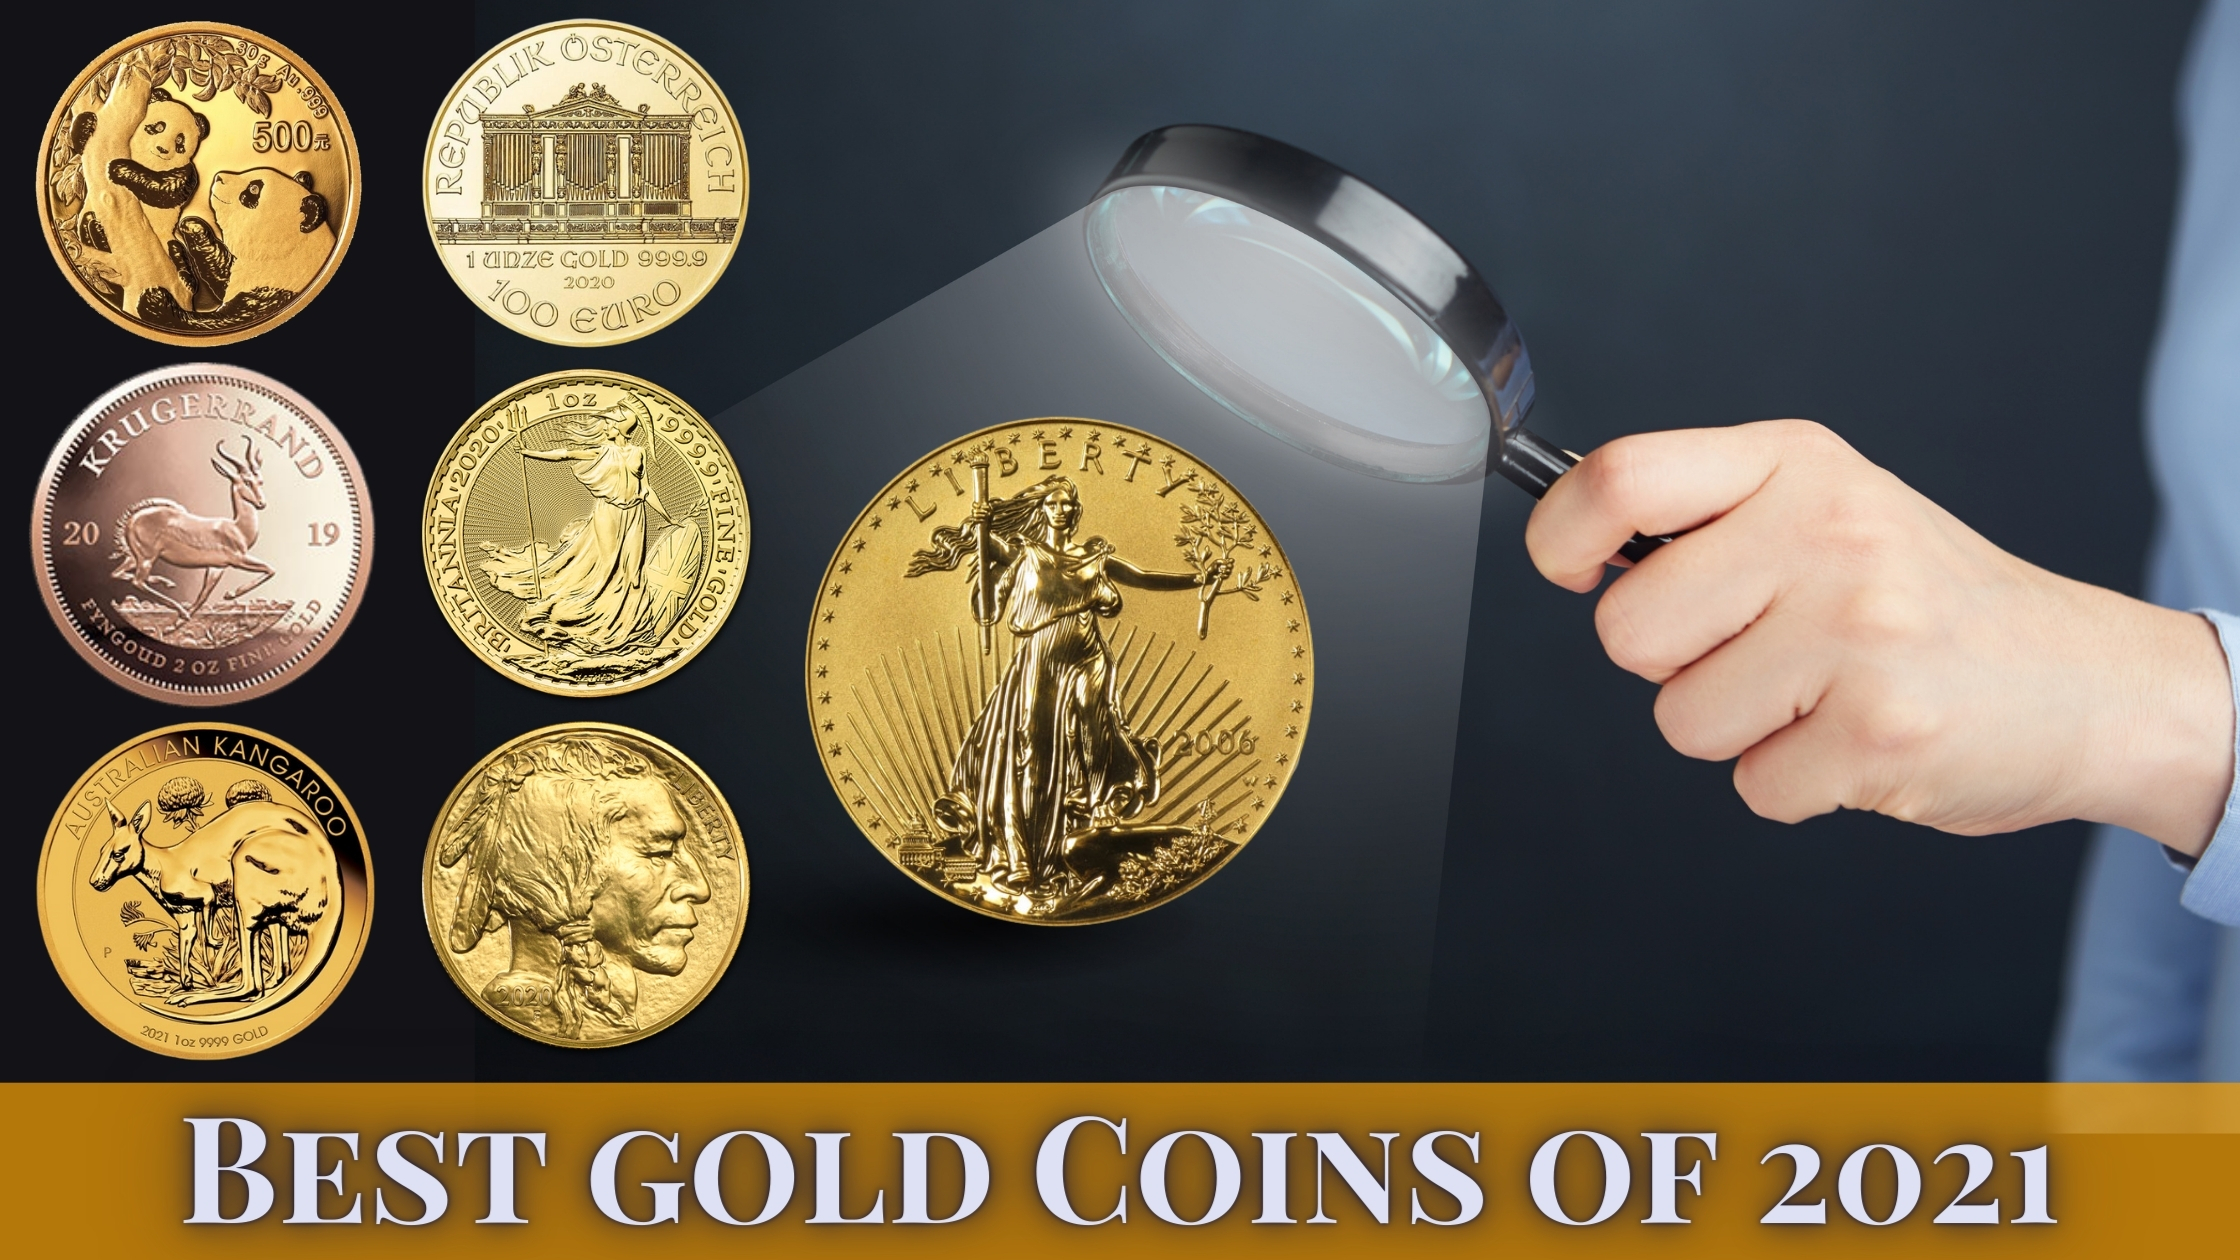 Best Gold Coins of 2021 by Numismatic Traders